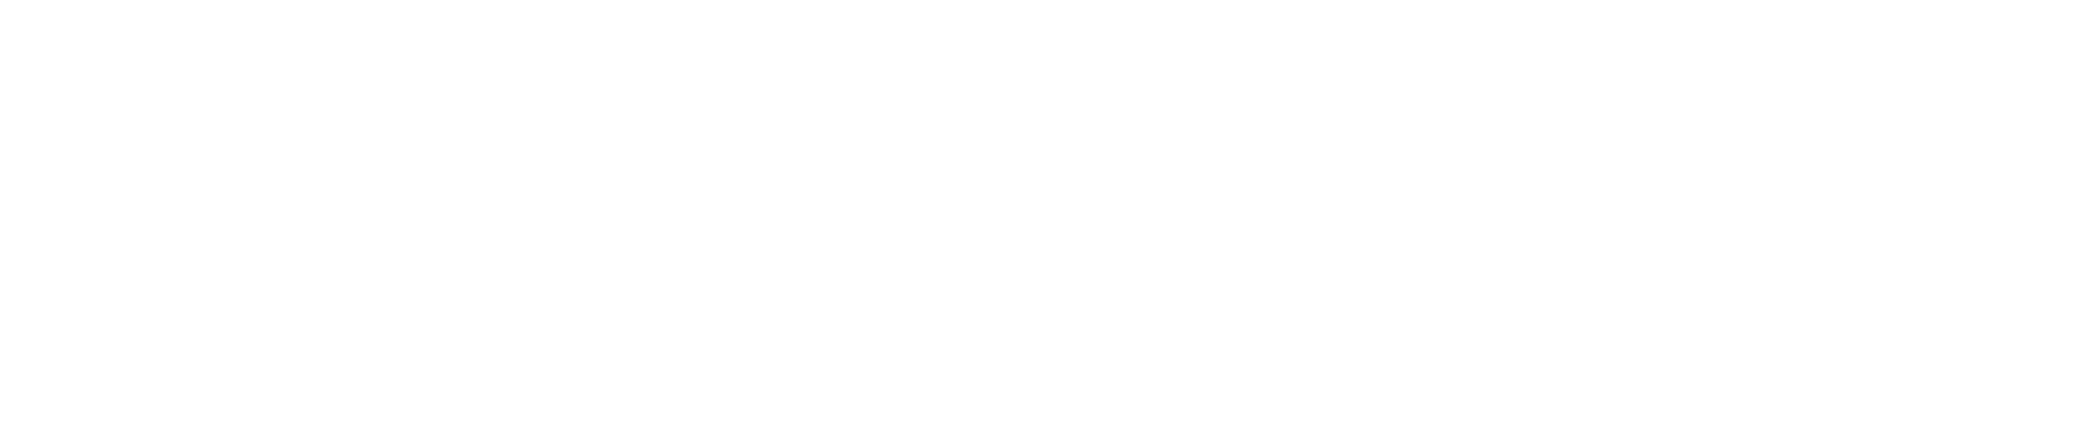 Witherell's logo in white